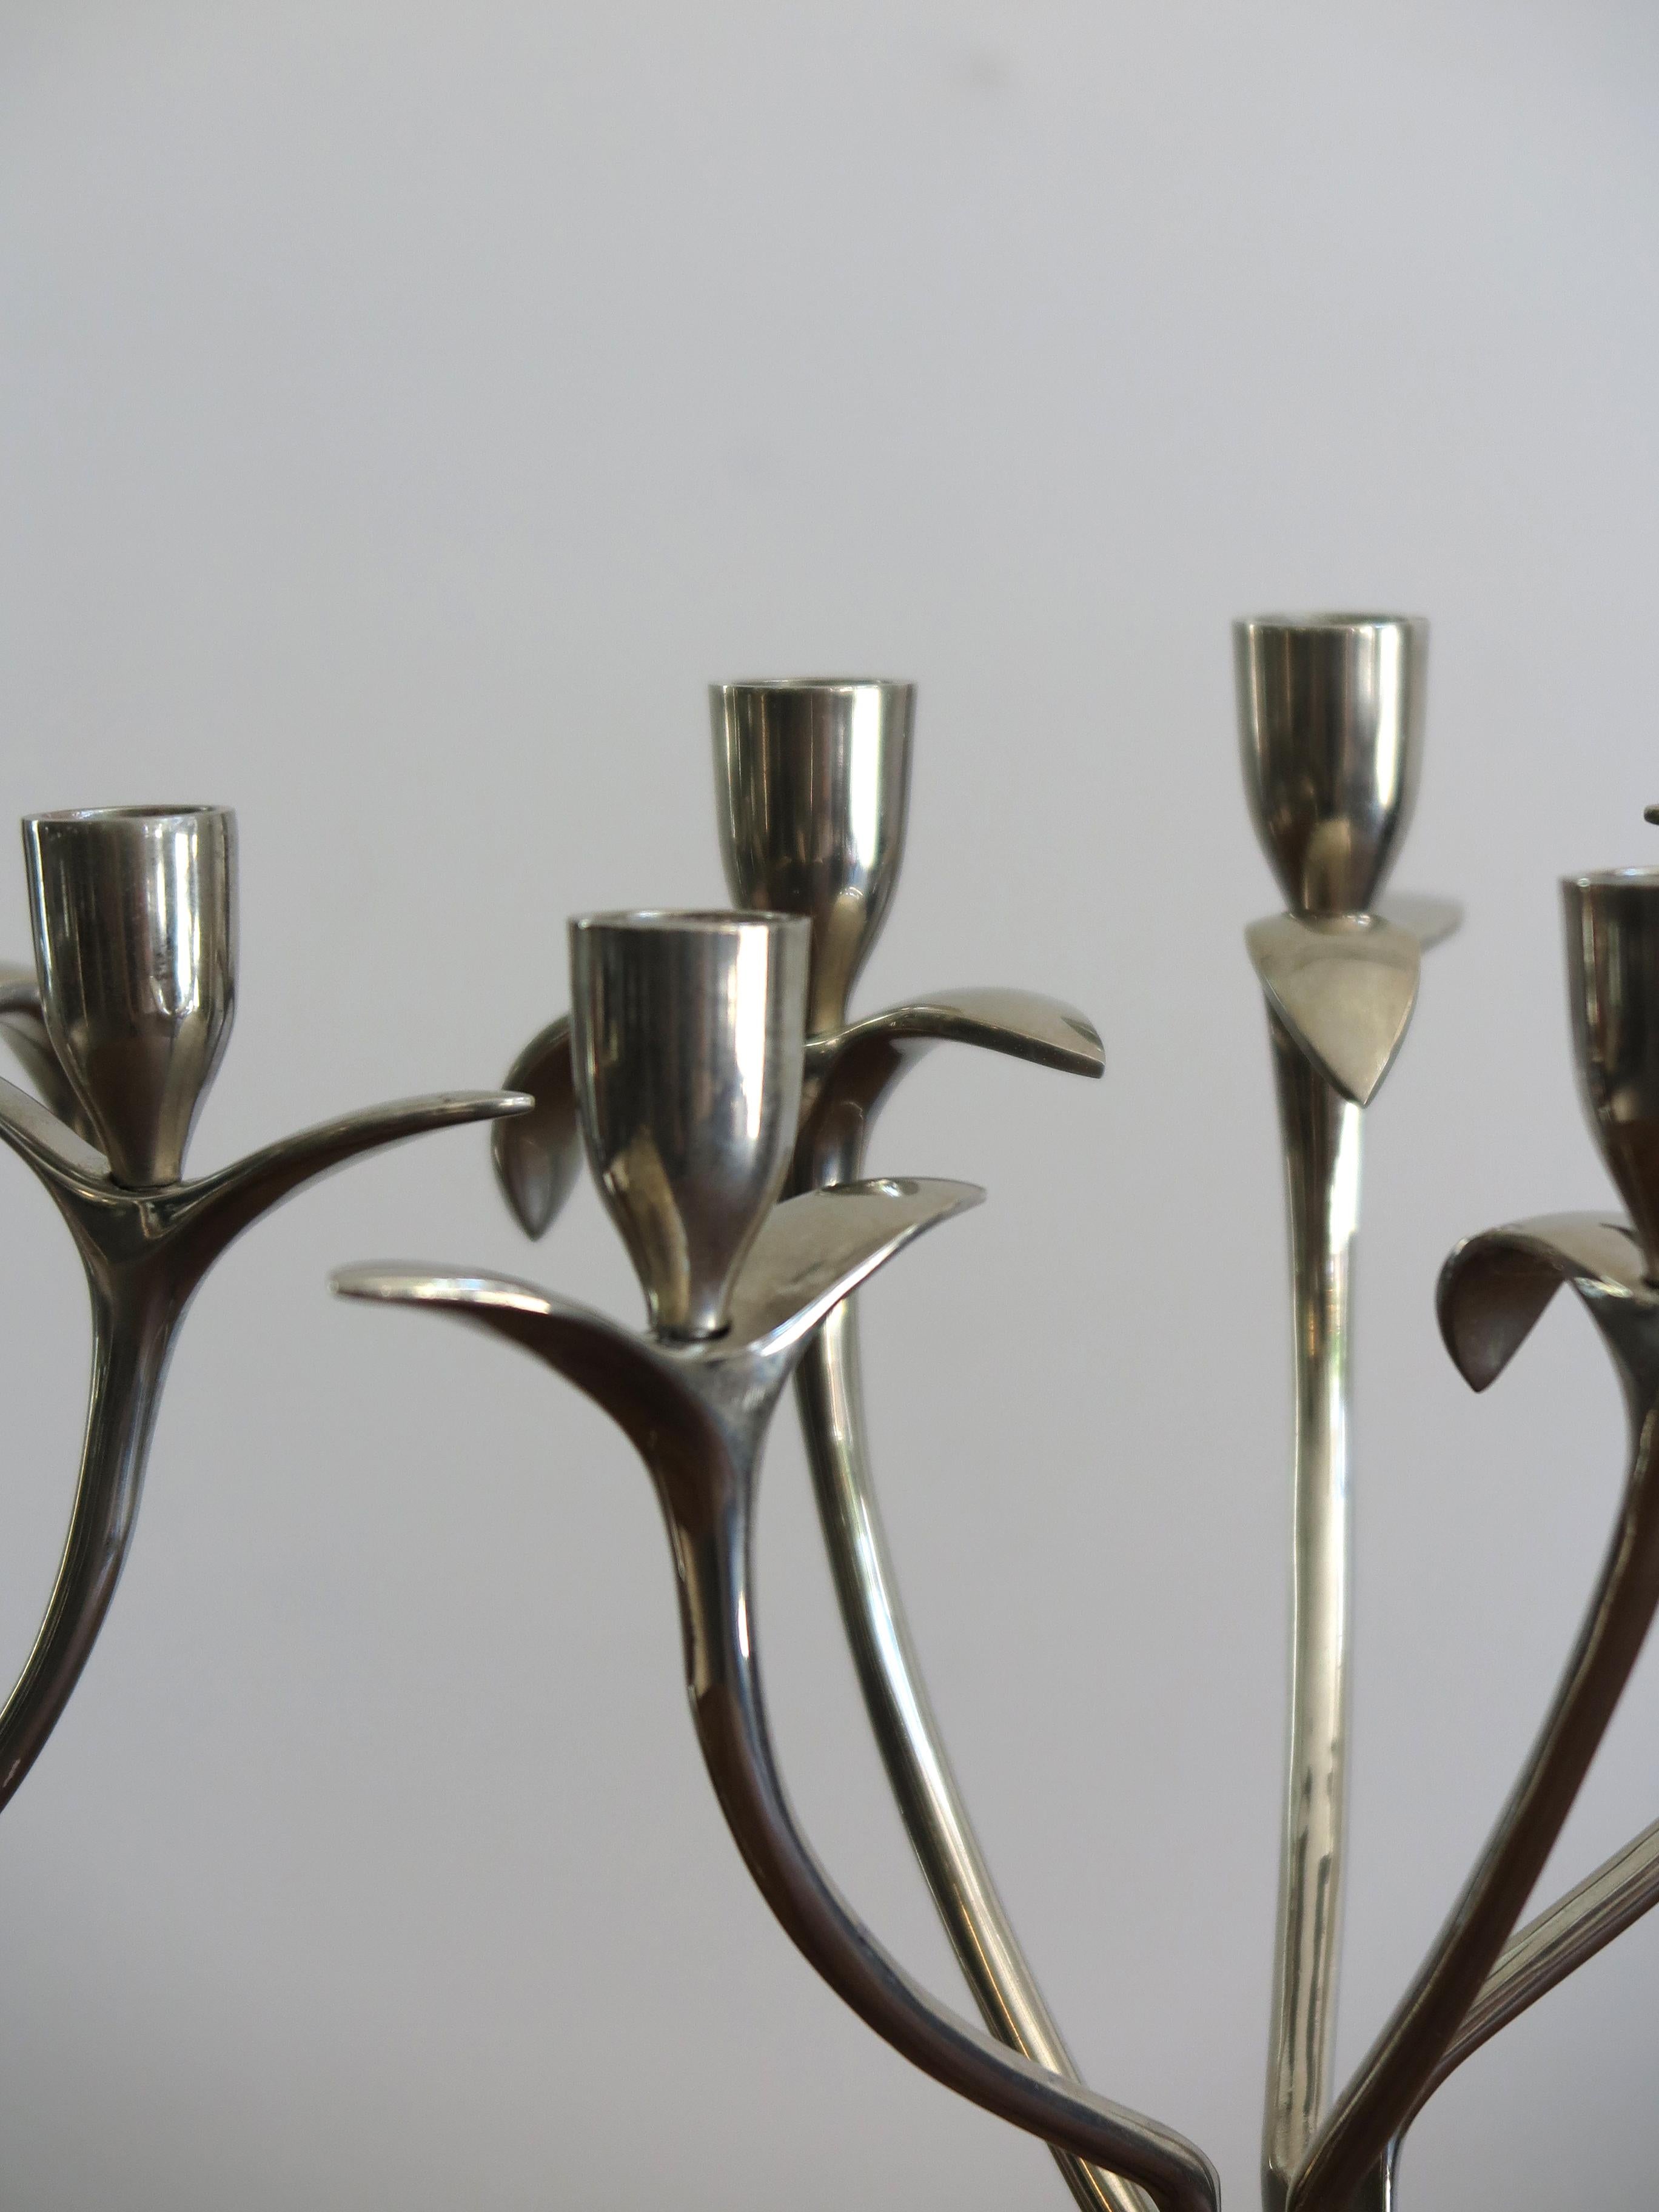 Amazing and rare candleholders model Antonietta designed by artist Borek Sipek for Driade Italia in 1980 with five brass arms with polished nickel finish.
Original manufacturing label.
Available only one.

Please note that the items are original